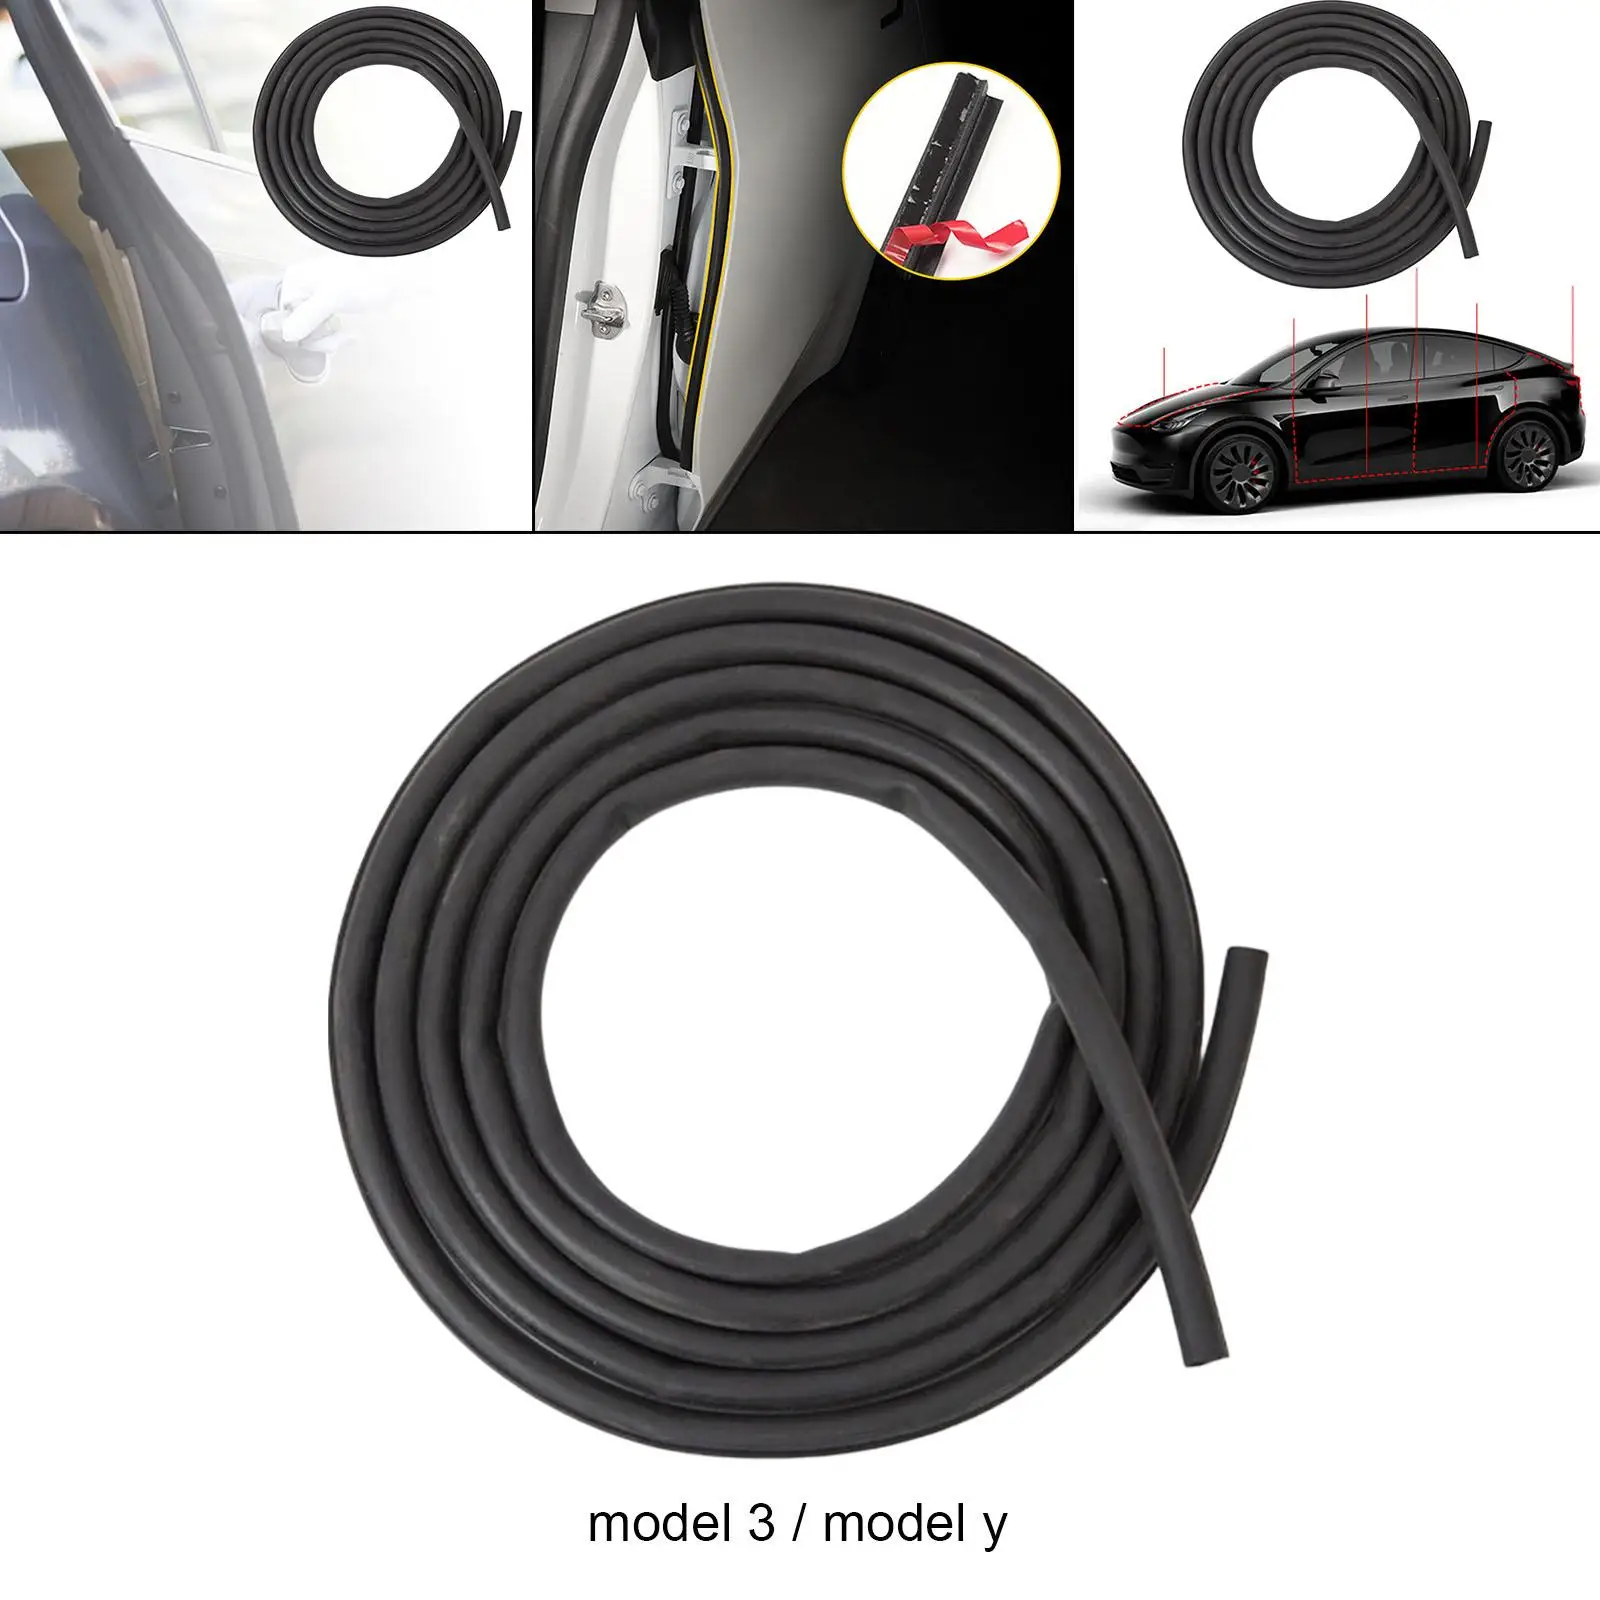 Seal   to Install for Front/Rear Door Rainproof Fits for Model 3/Y